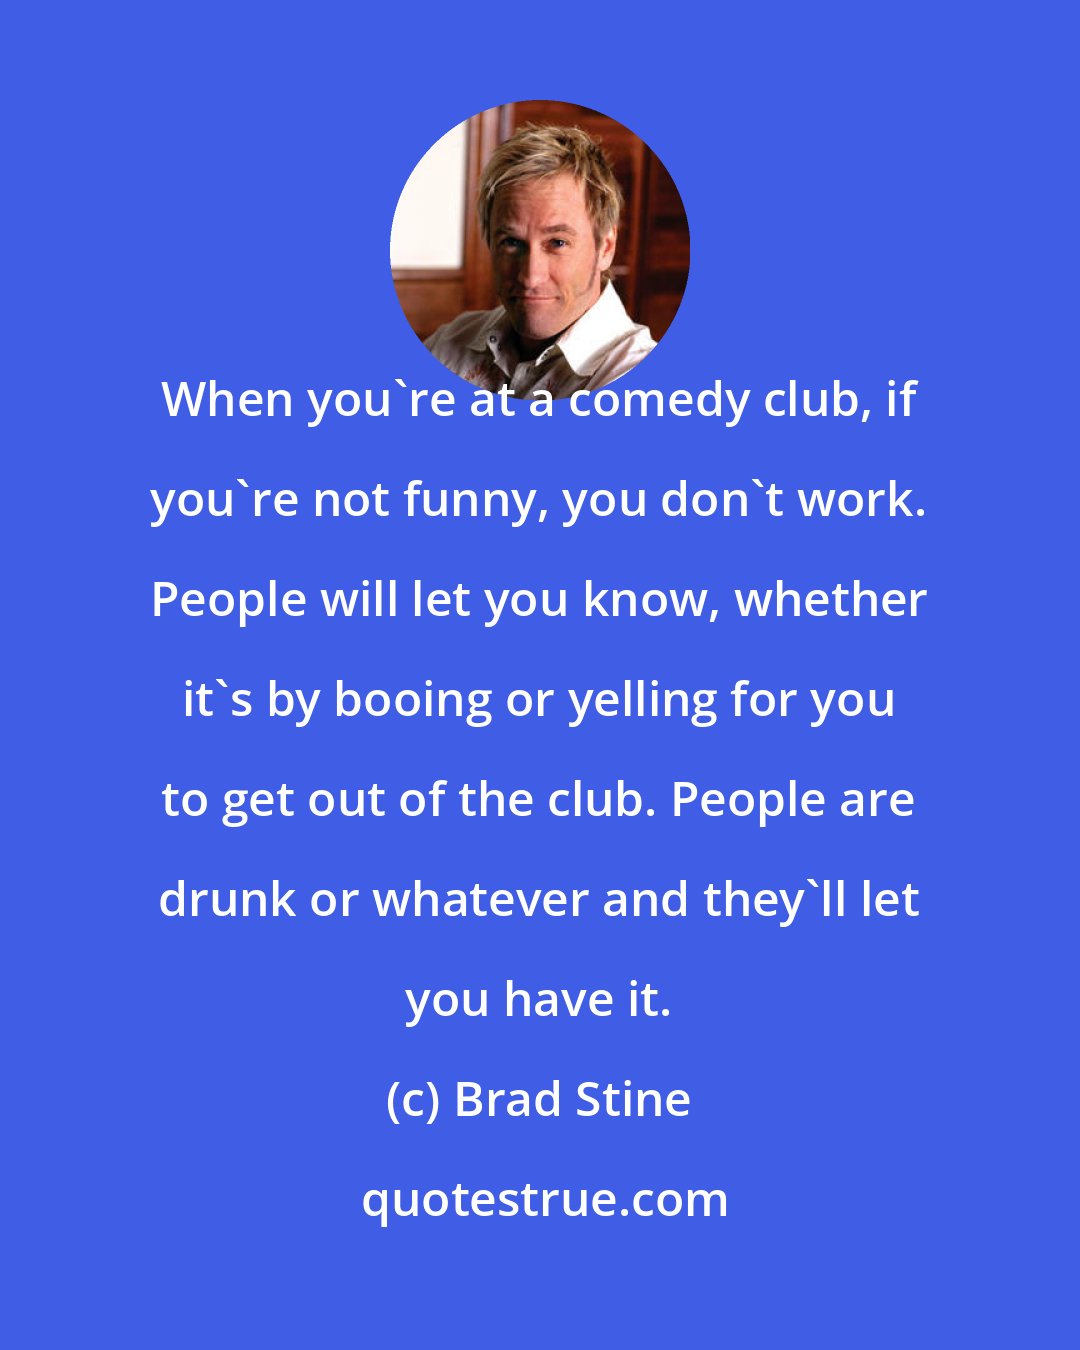 Brad Stine: When you're at a comedy club, if you're not funny, you don't work. People will let you know, whether it's by booing or yelling for you to get out of the club. People are drunk or whatever and they'll let you have it.